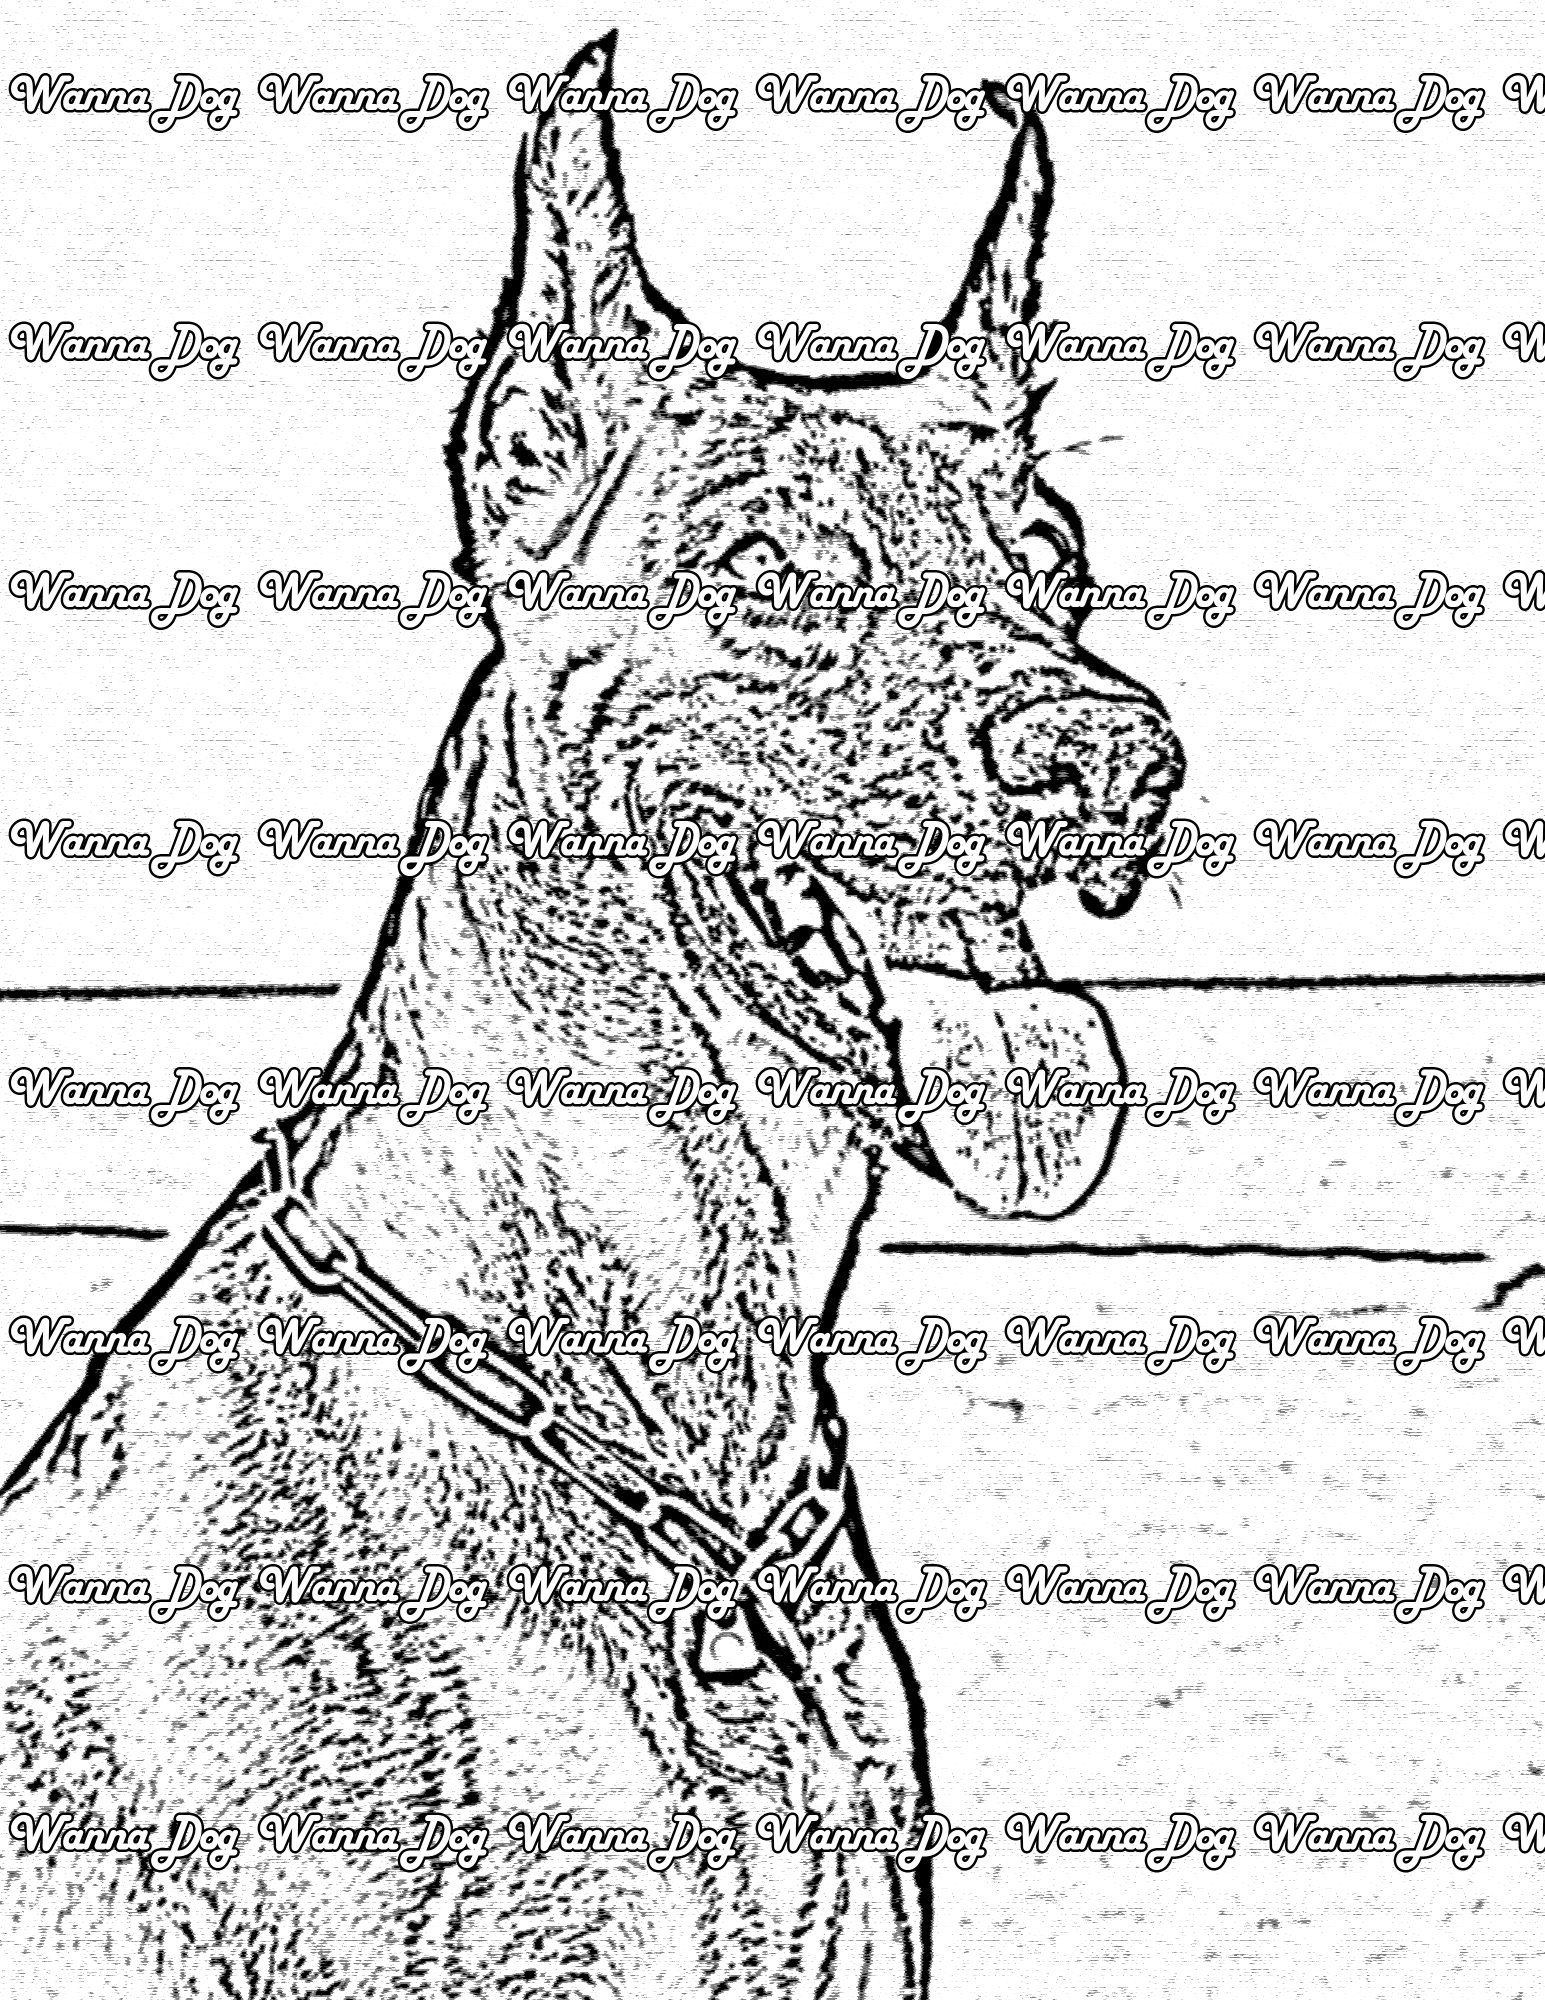 Doberman Coloring Page of a Doberman with their tongue hanging out and smiling